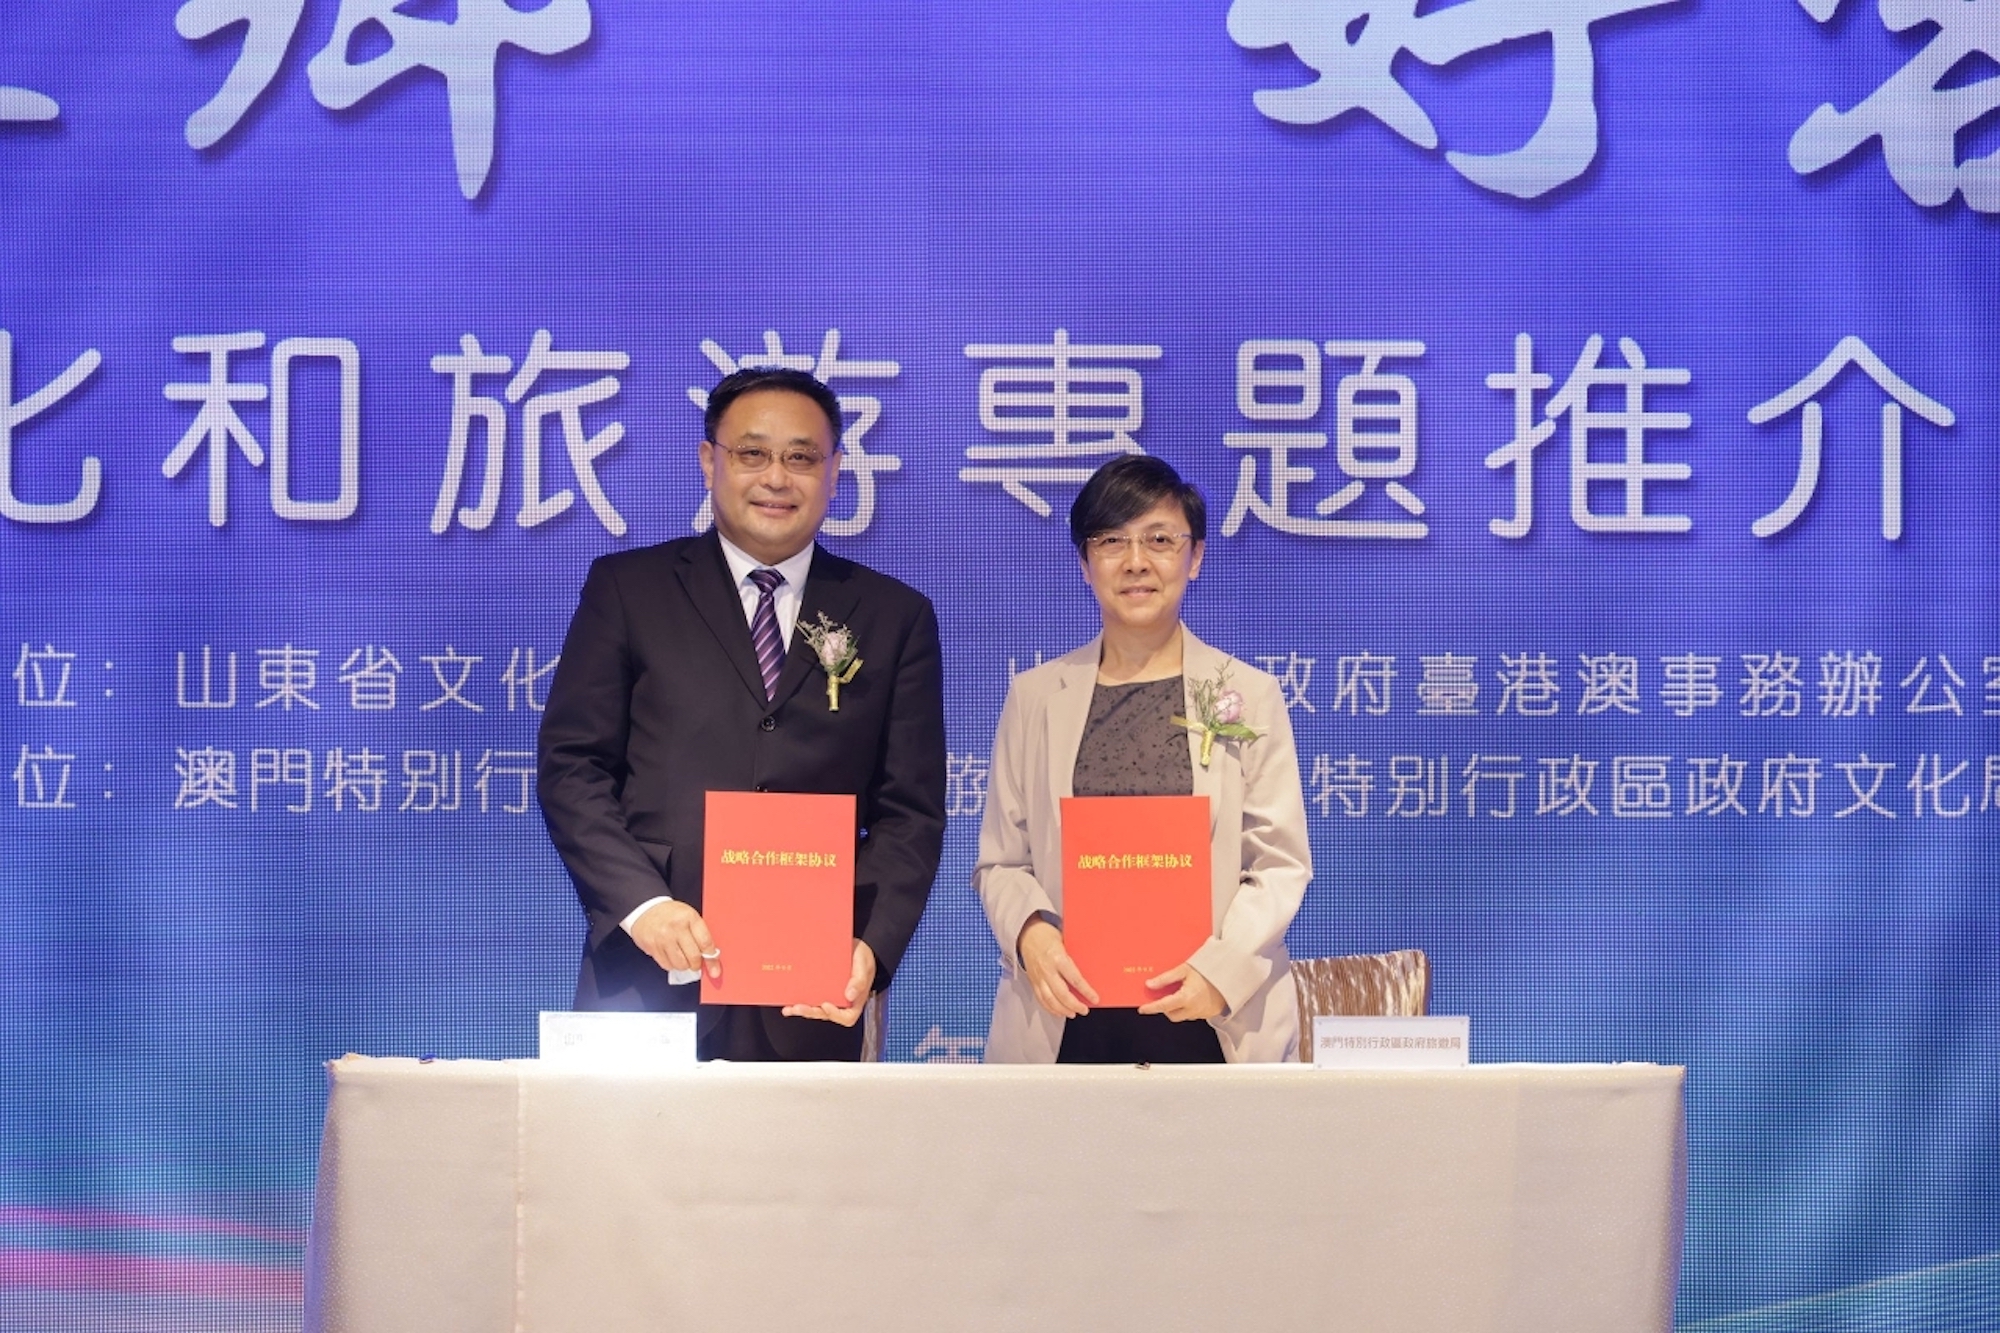 Macao Shandong tourism cooperation agreement